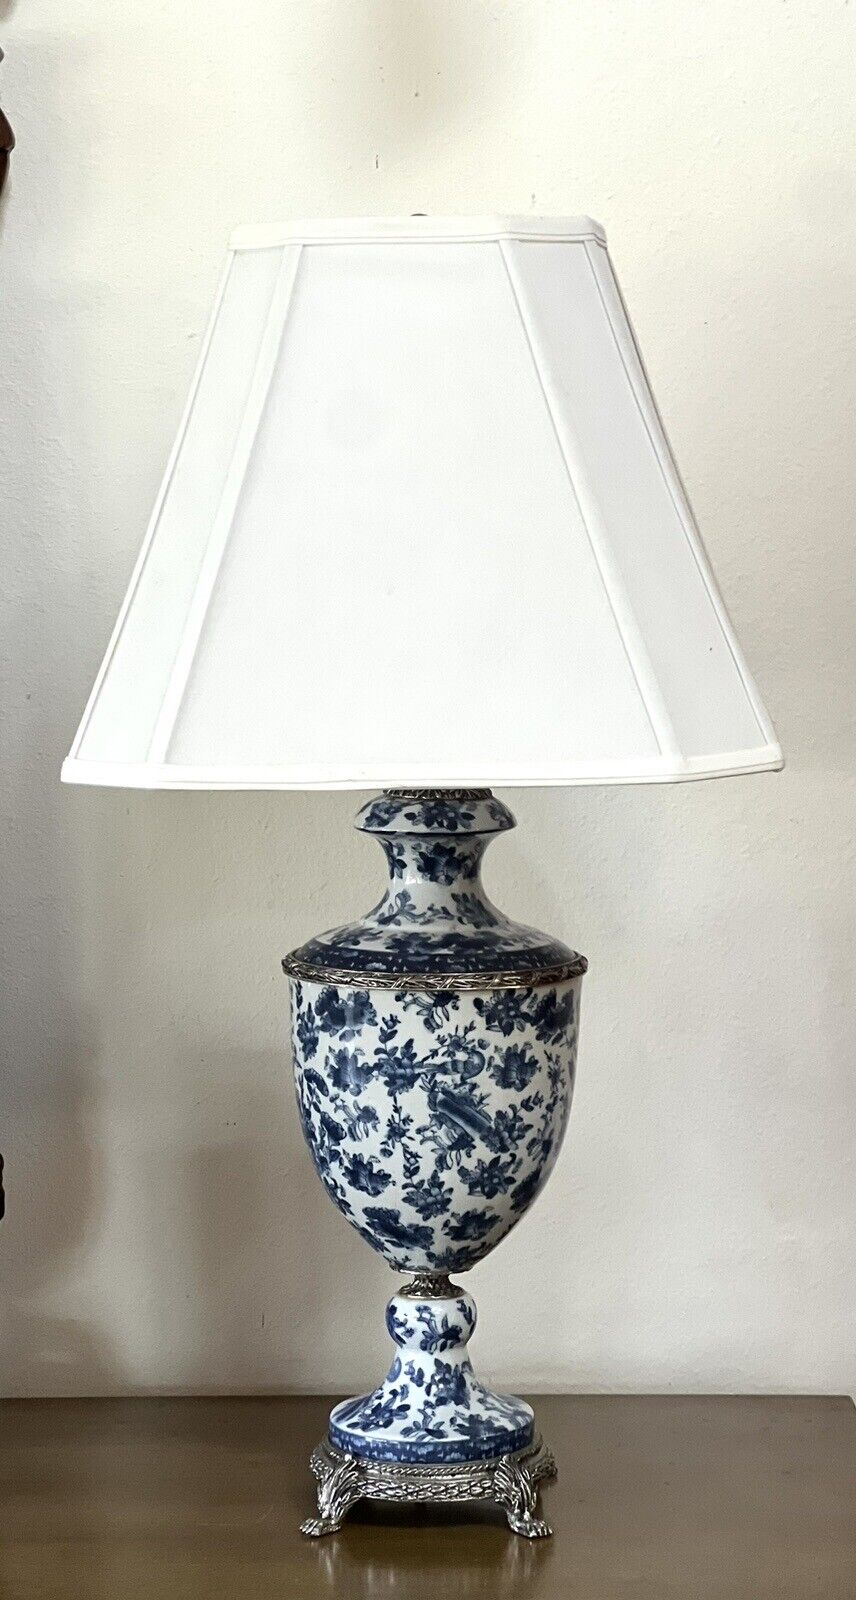 Antique Lamp Blue And White China LARGE Fine Porcelain